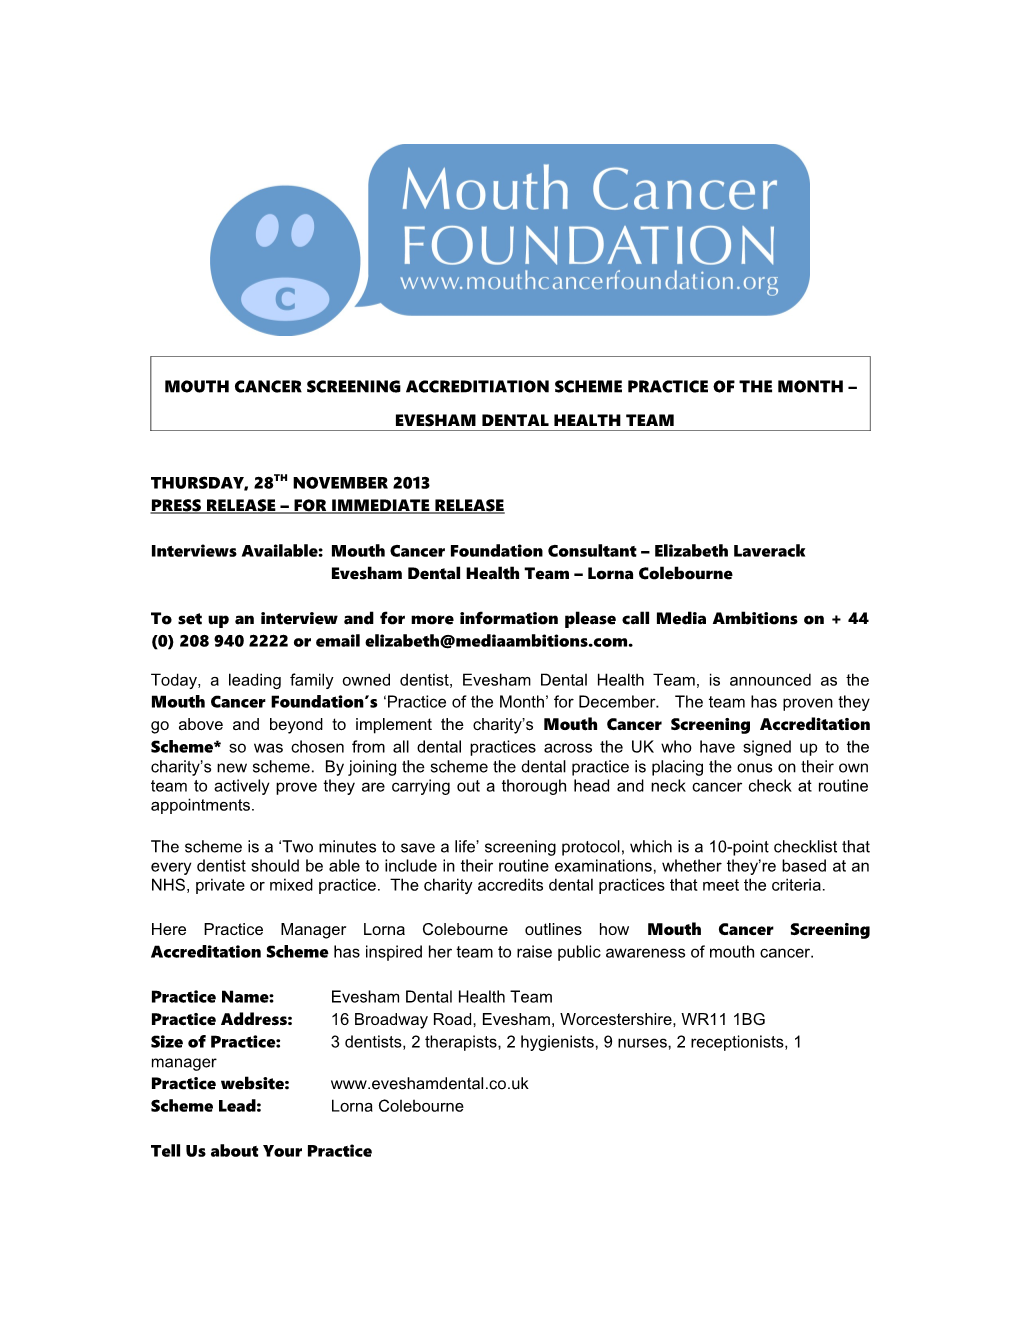 Mouth Cancer Screening Accreditiation Scheme Practice of the Month Evesham Dental Health Team